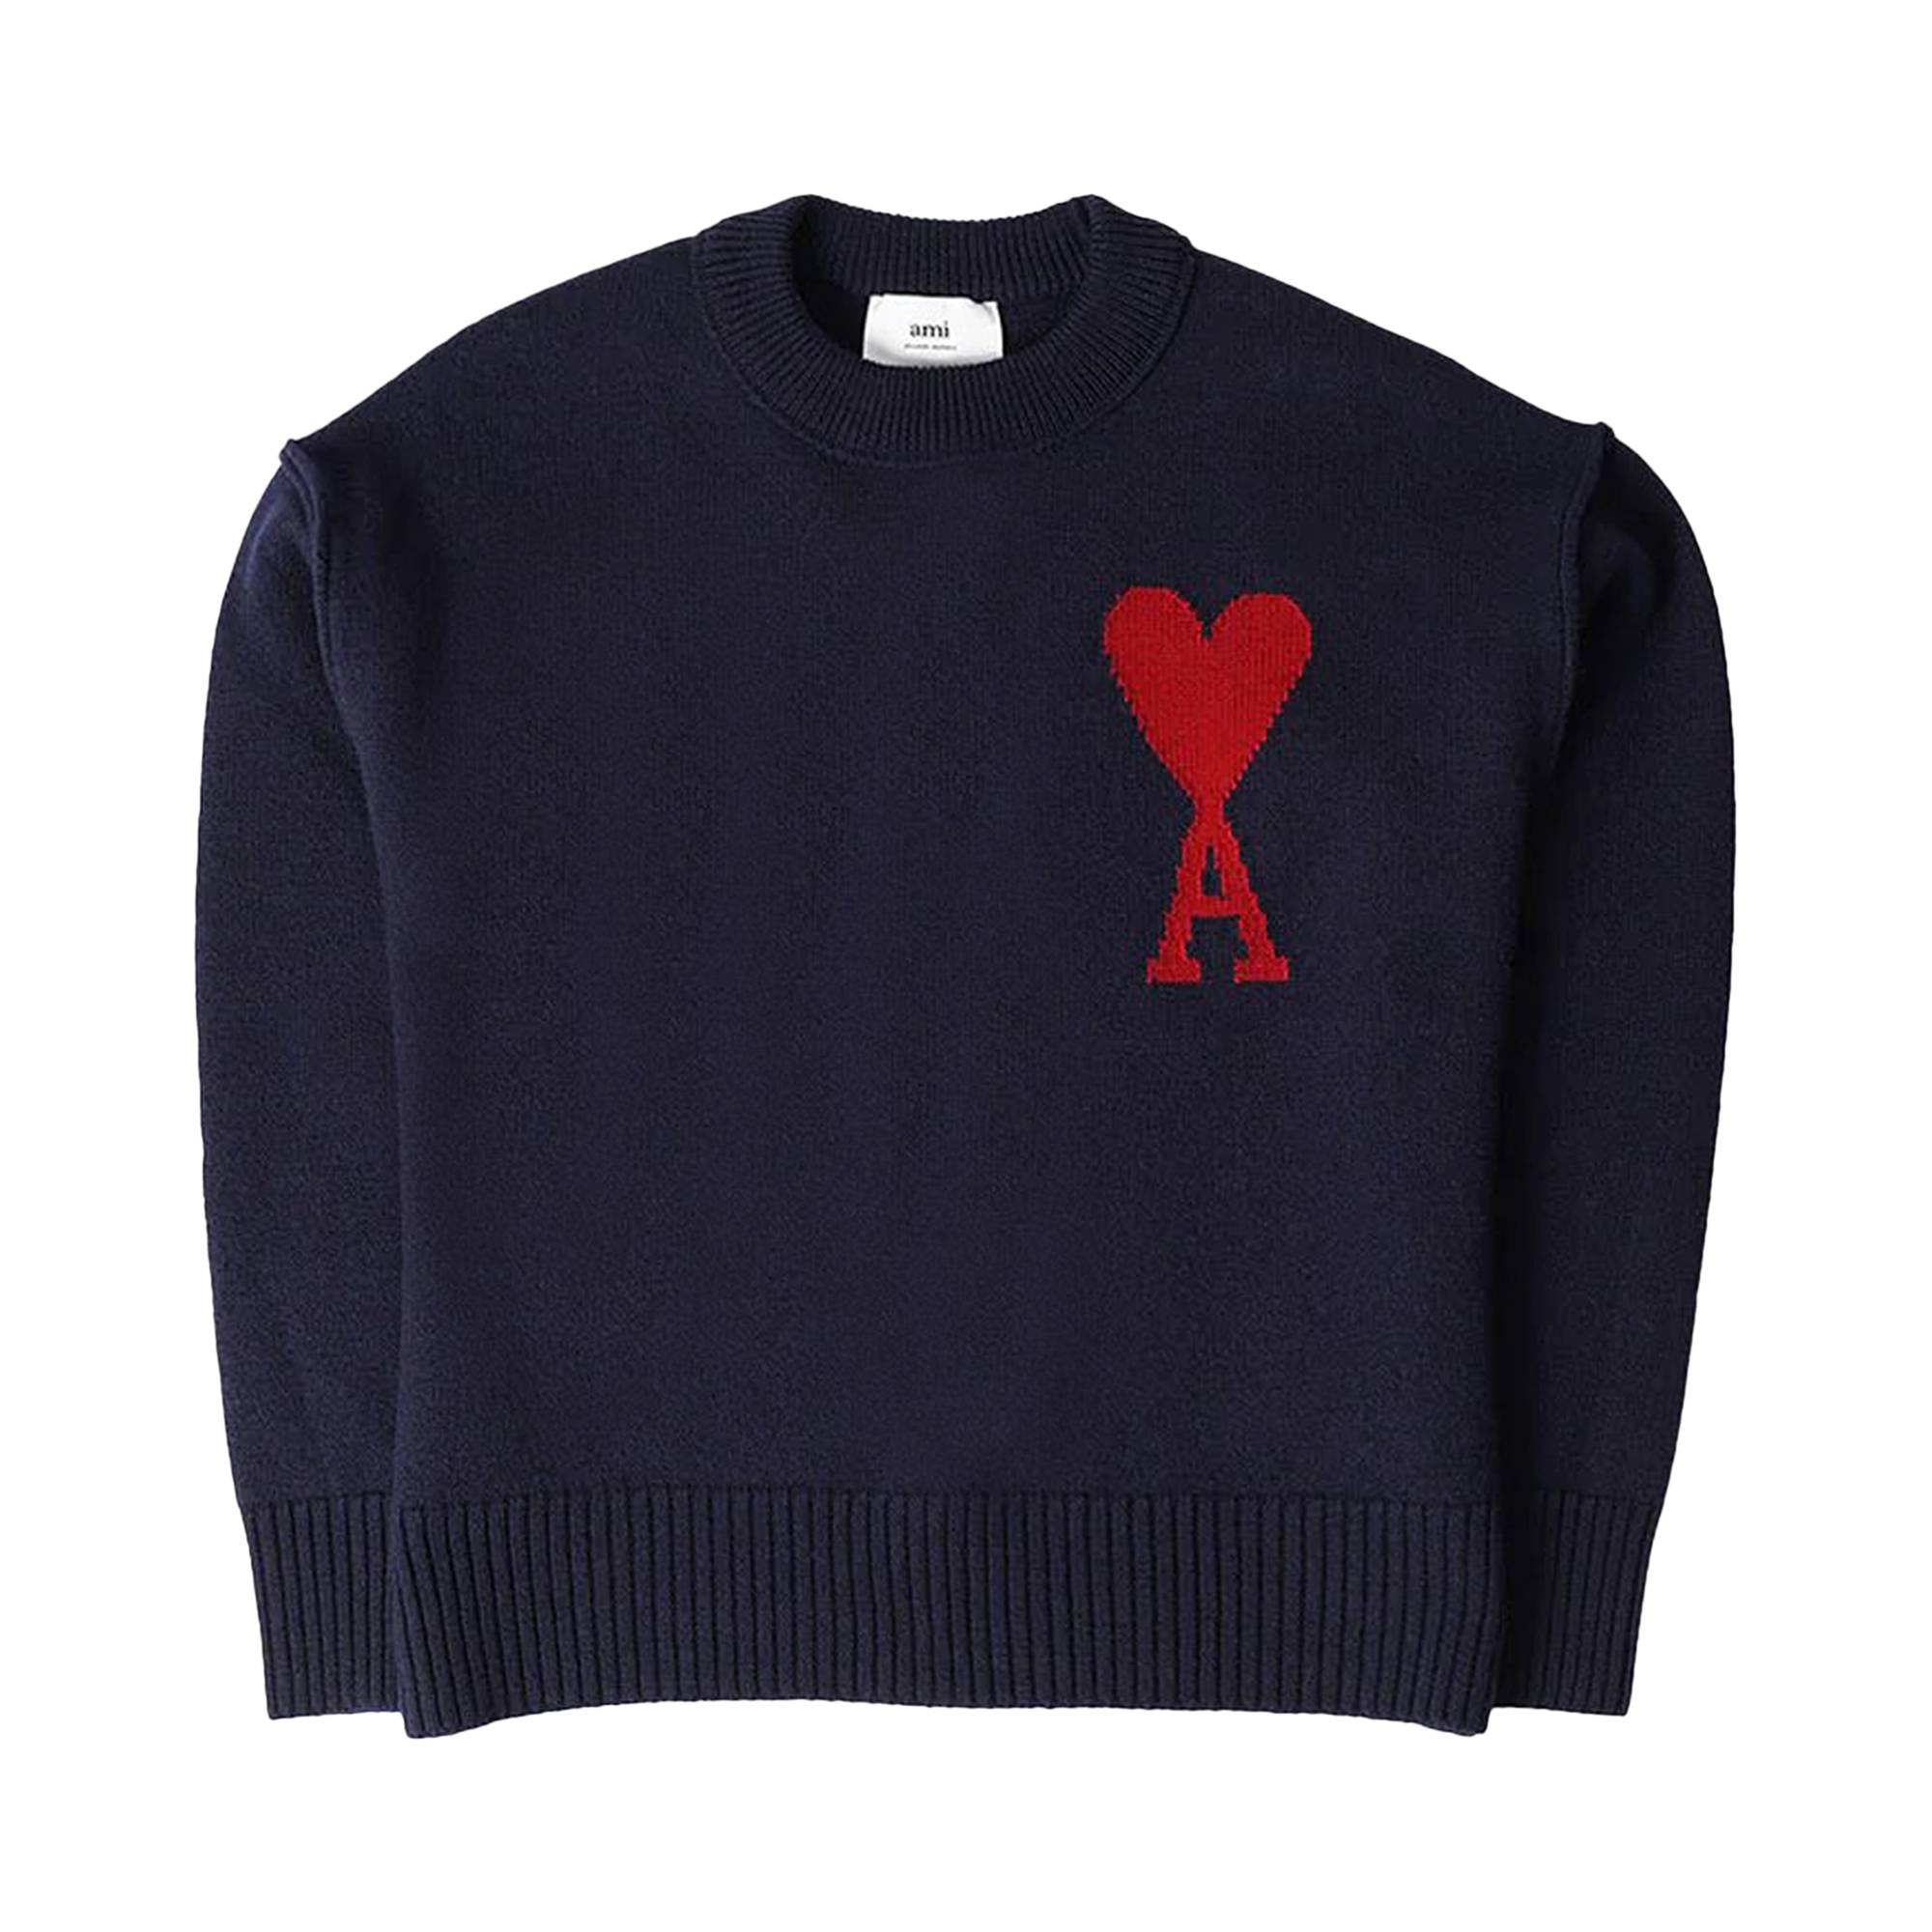 Ami Large Heart Sweater 'Blue/Red' - 1